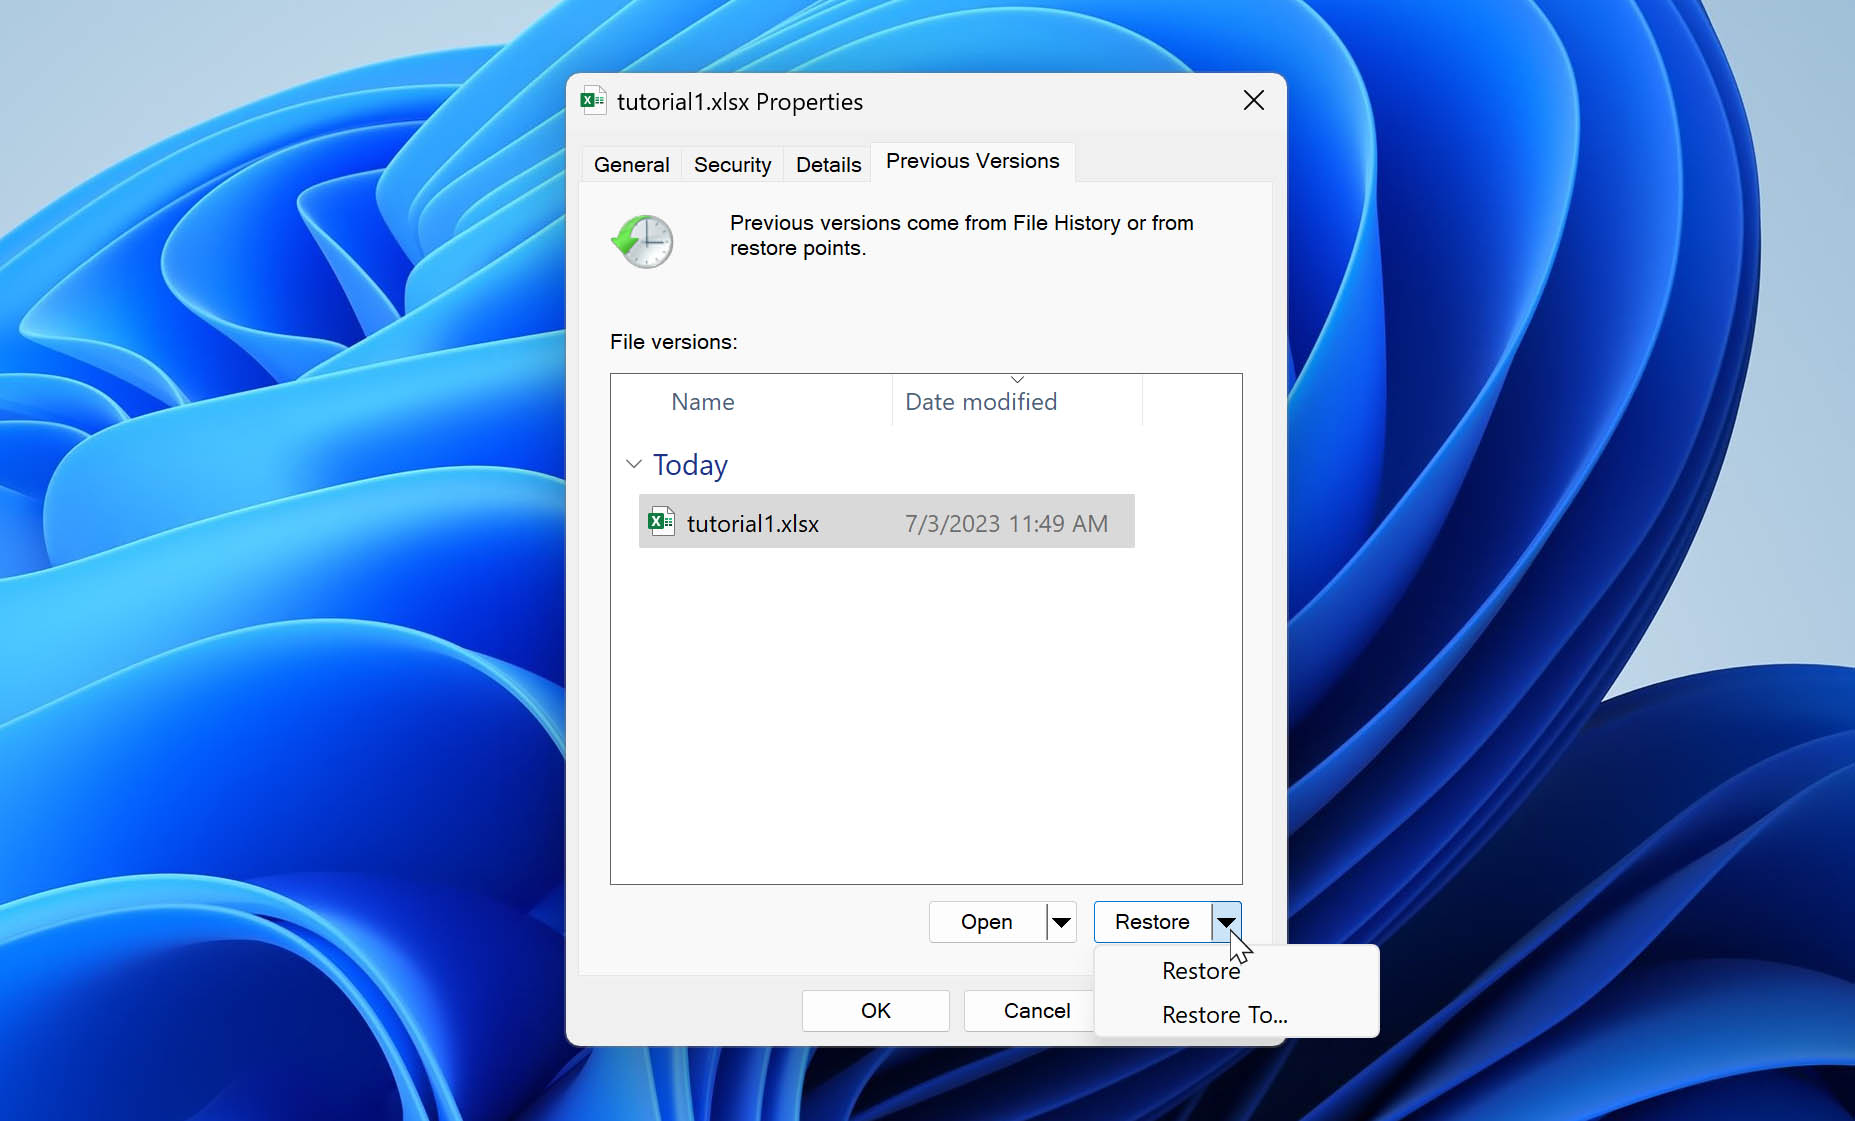 Image showcasing the restoration of a previous version of an Excel file, a method to recover unsaved or deleted files